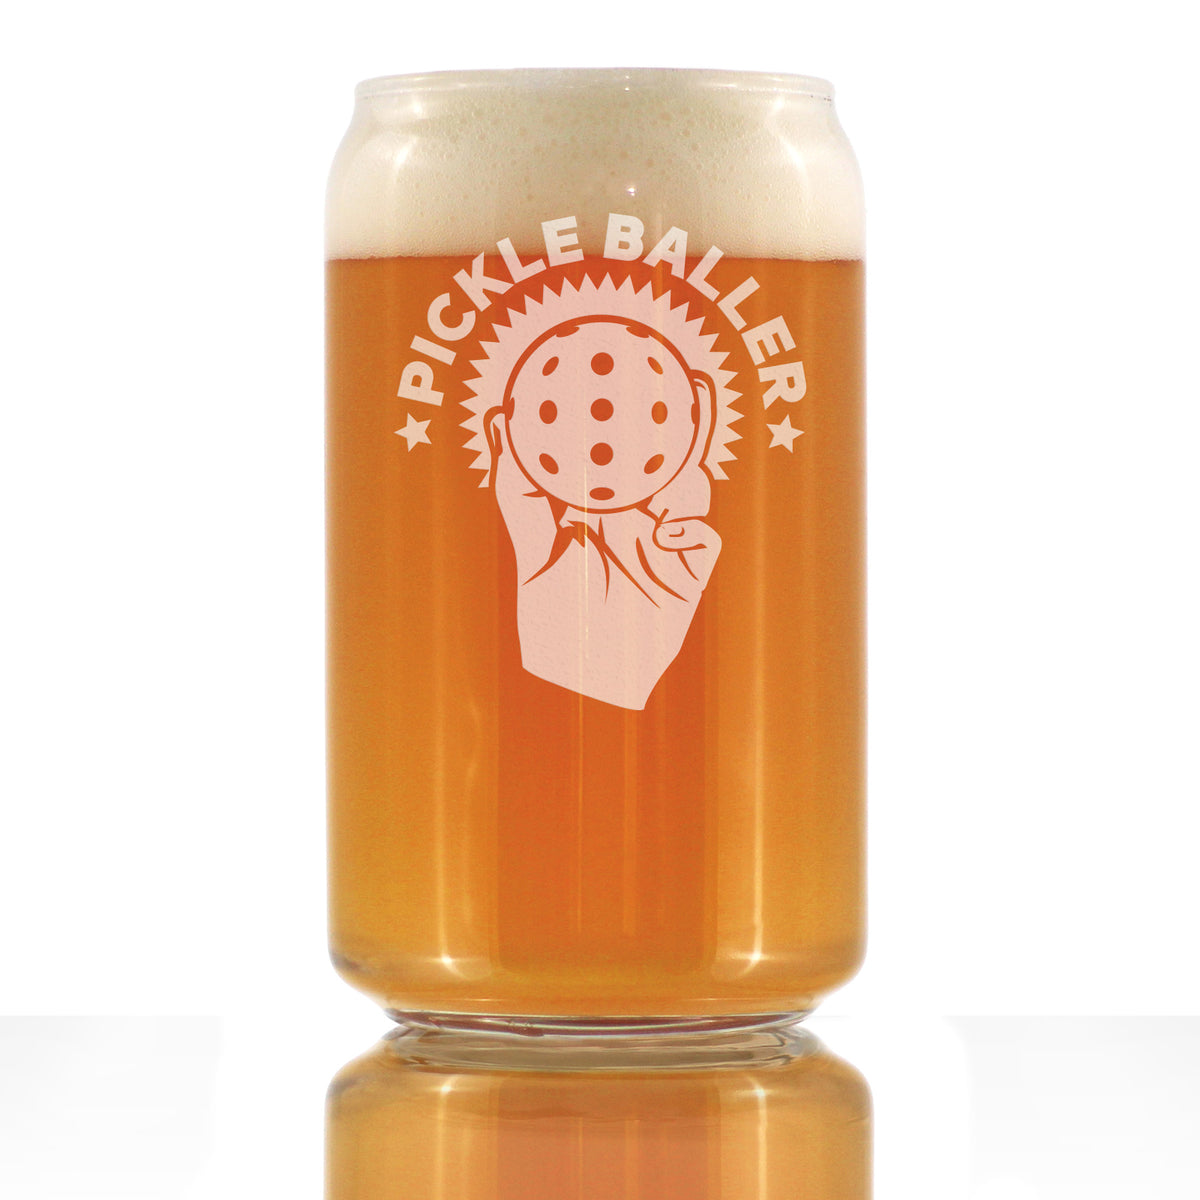 Pickleballer - Beer Can Pint Glass - Funny Pickleball Themed Decor and Gifts - 16 oz Glasses